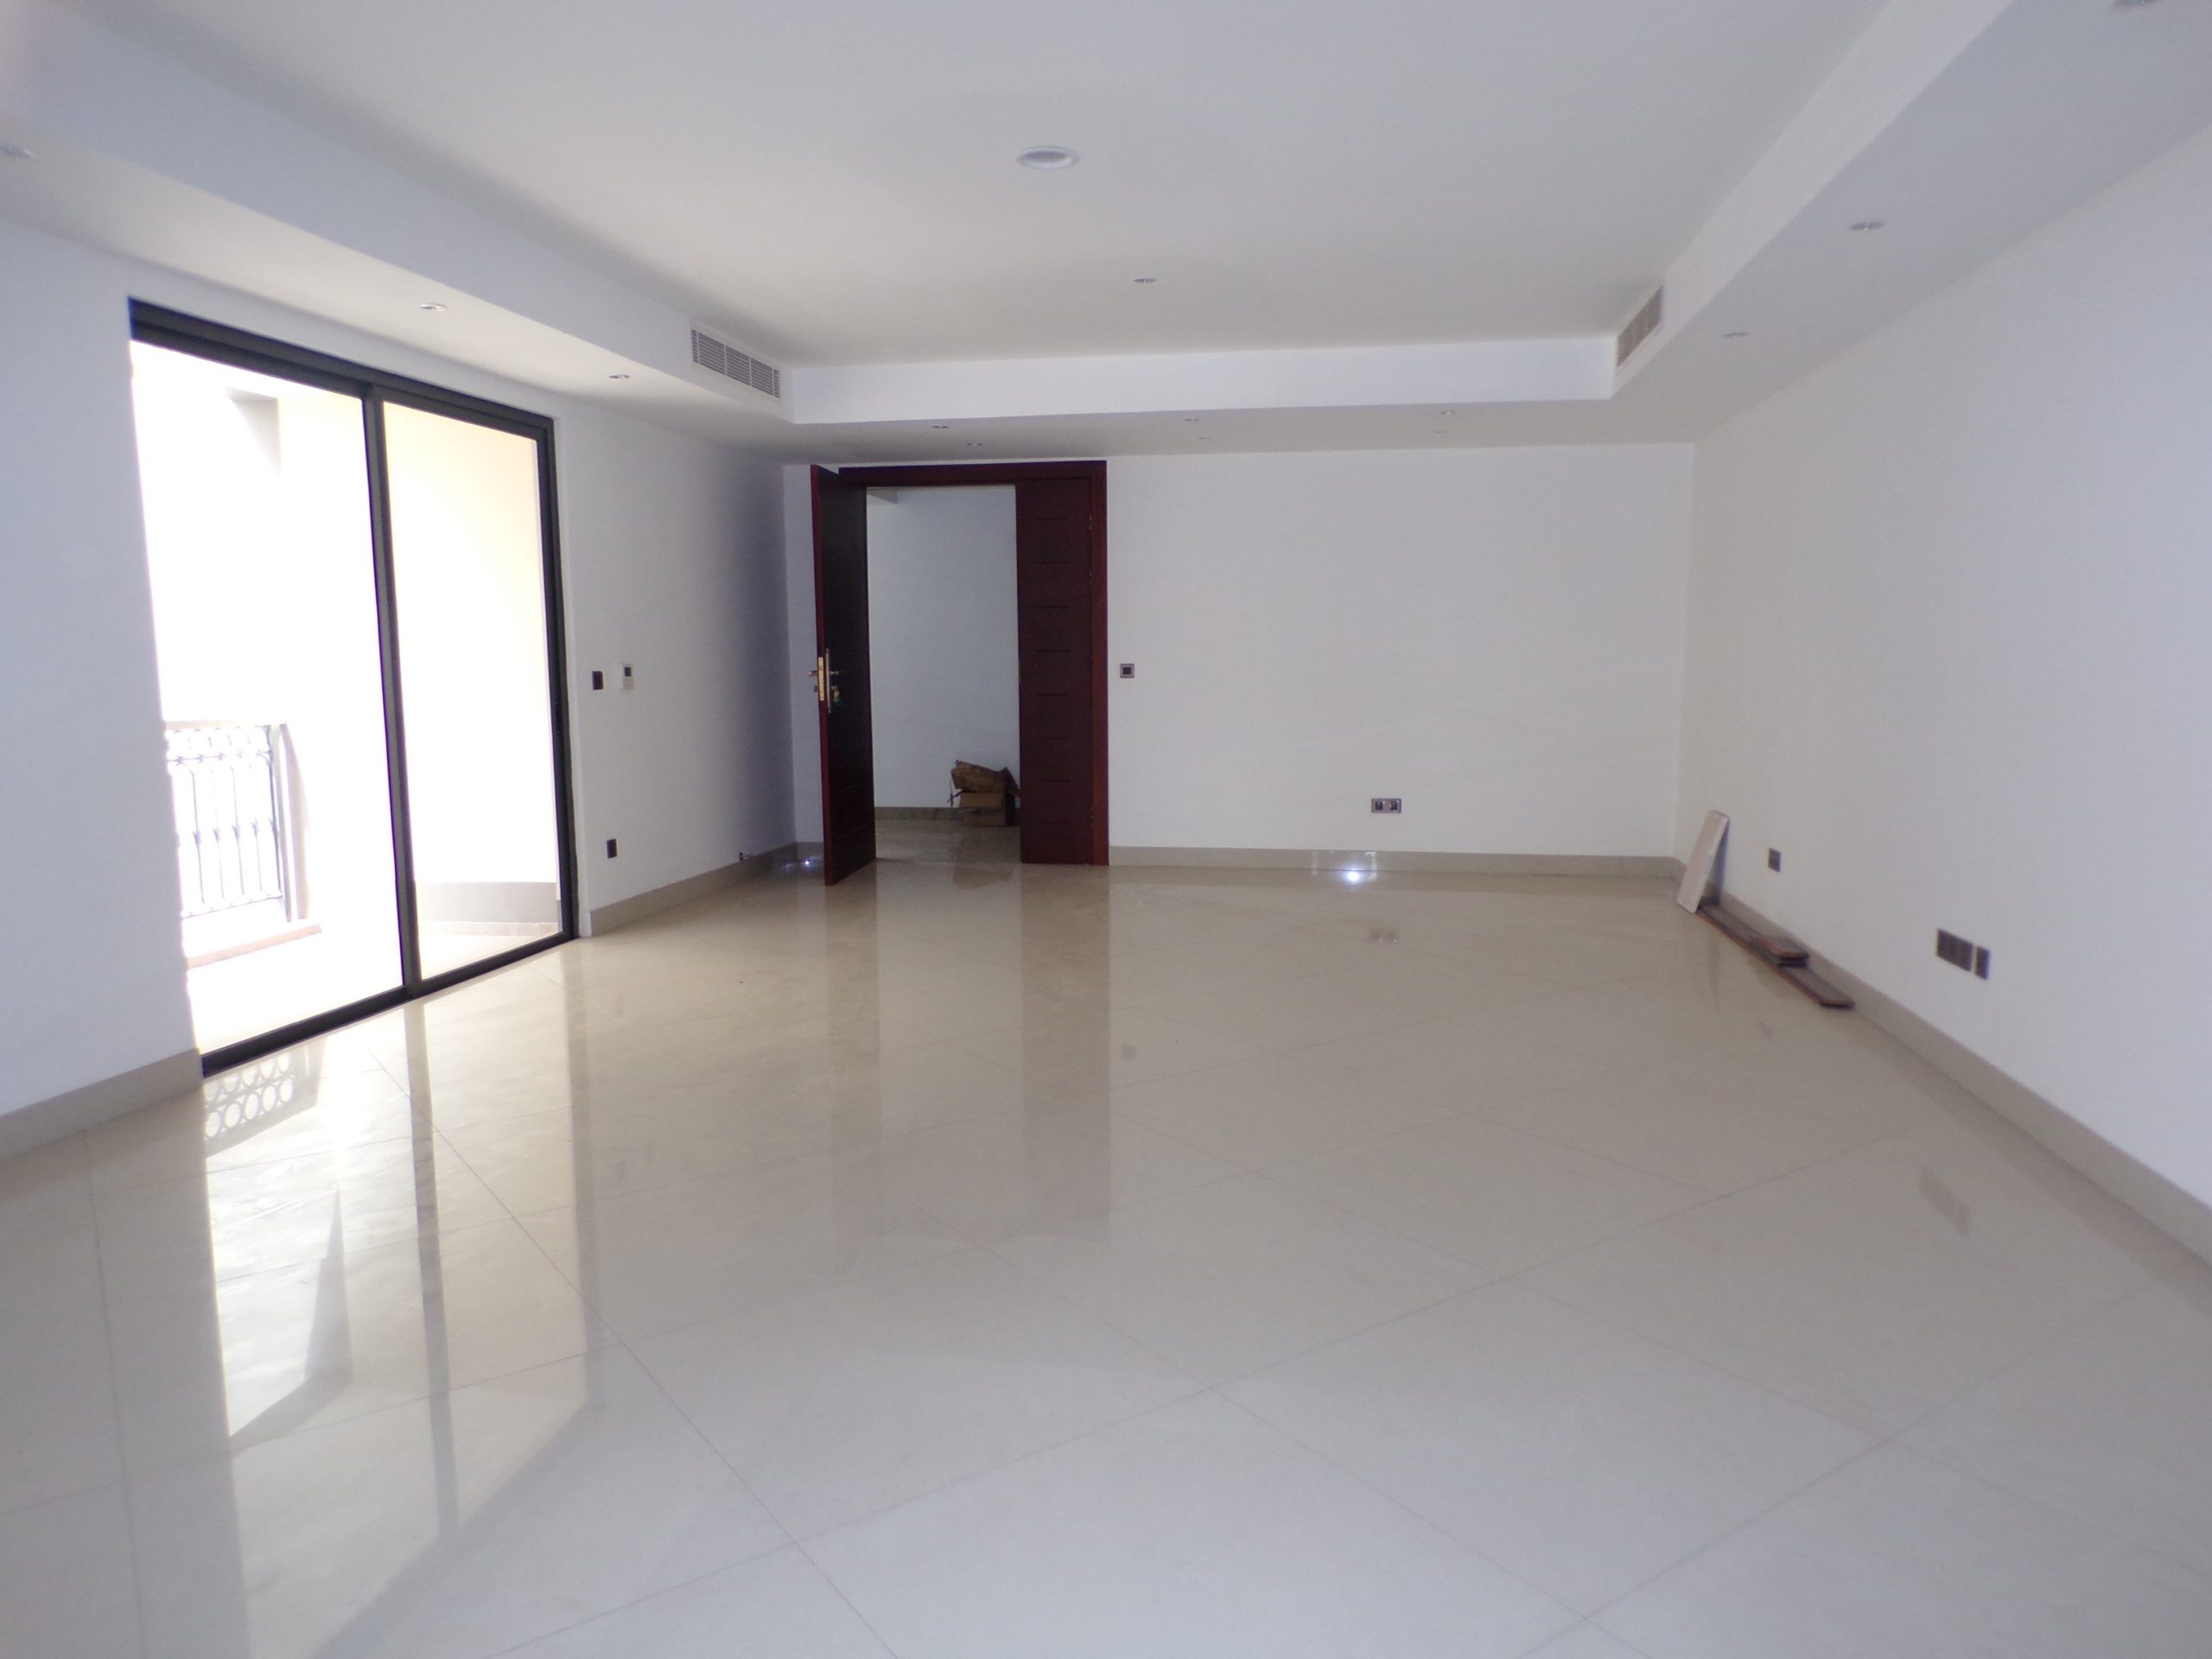 2 BEDROOM APARTMENT FOR RENT AT AIRPORT RESIDENTIAL AREA